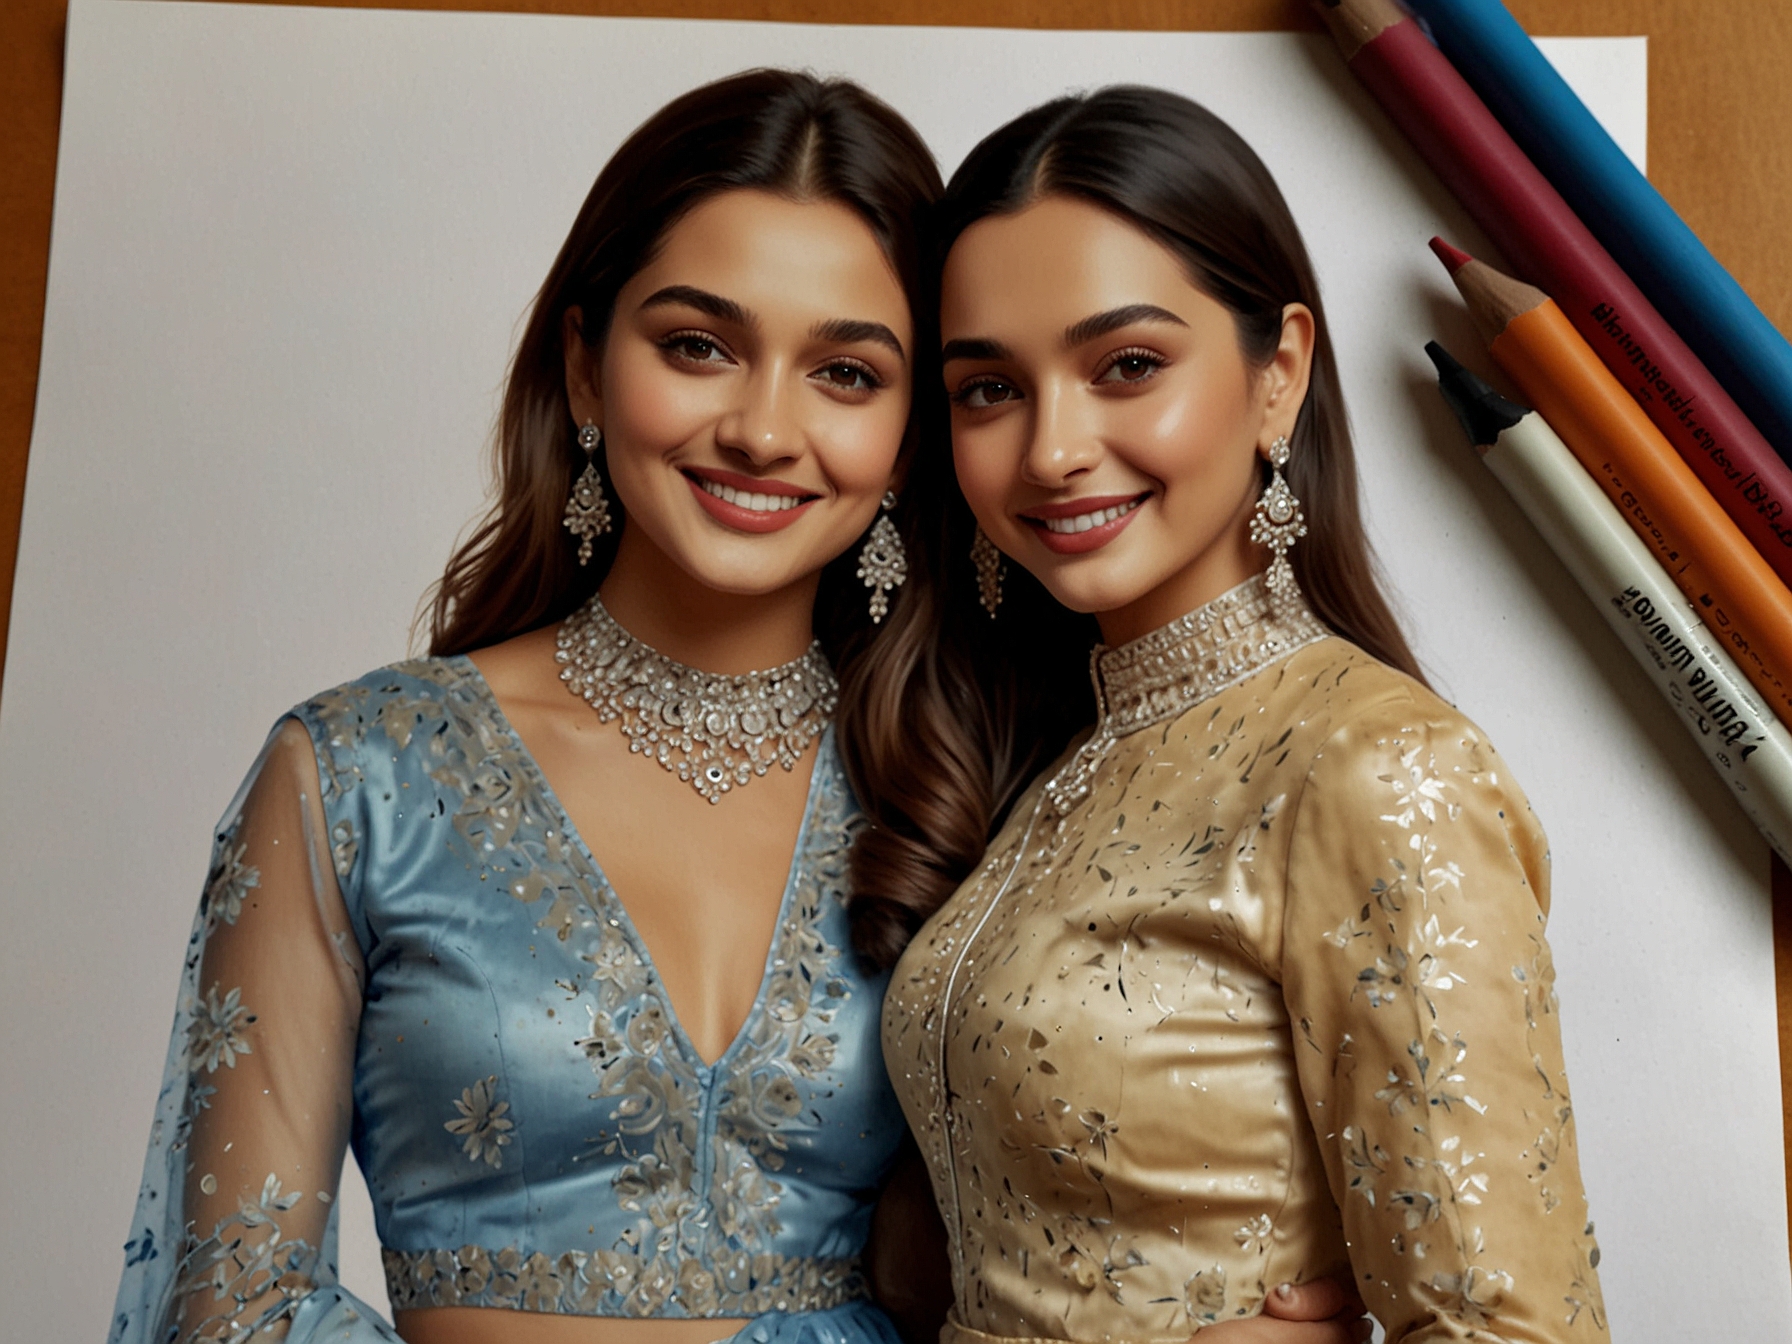 Alia Bhatt and Kiara Advani post heartfelt congratulatory messages on social media, sharing their best wishes for Sonakshi Sinha and Zaheer Iqbal's wedding, resonating with fans everywhere.